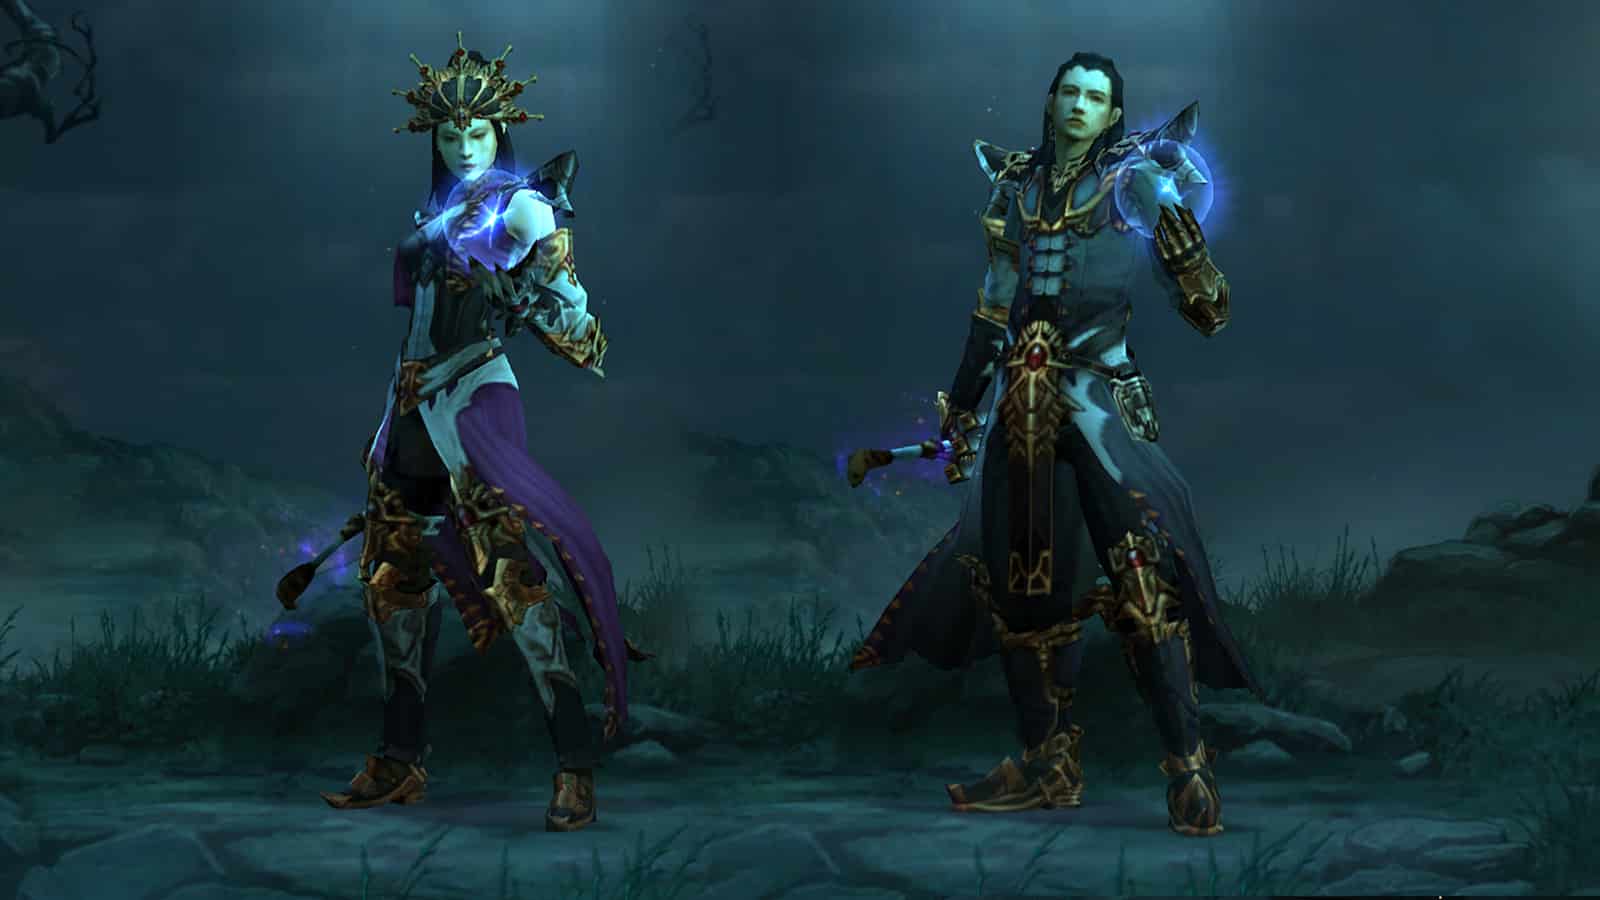 The male and female Wizard characters in Diablo 3